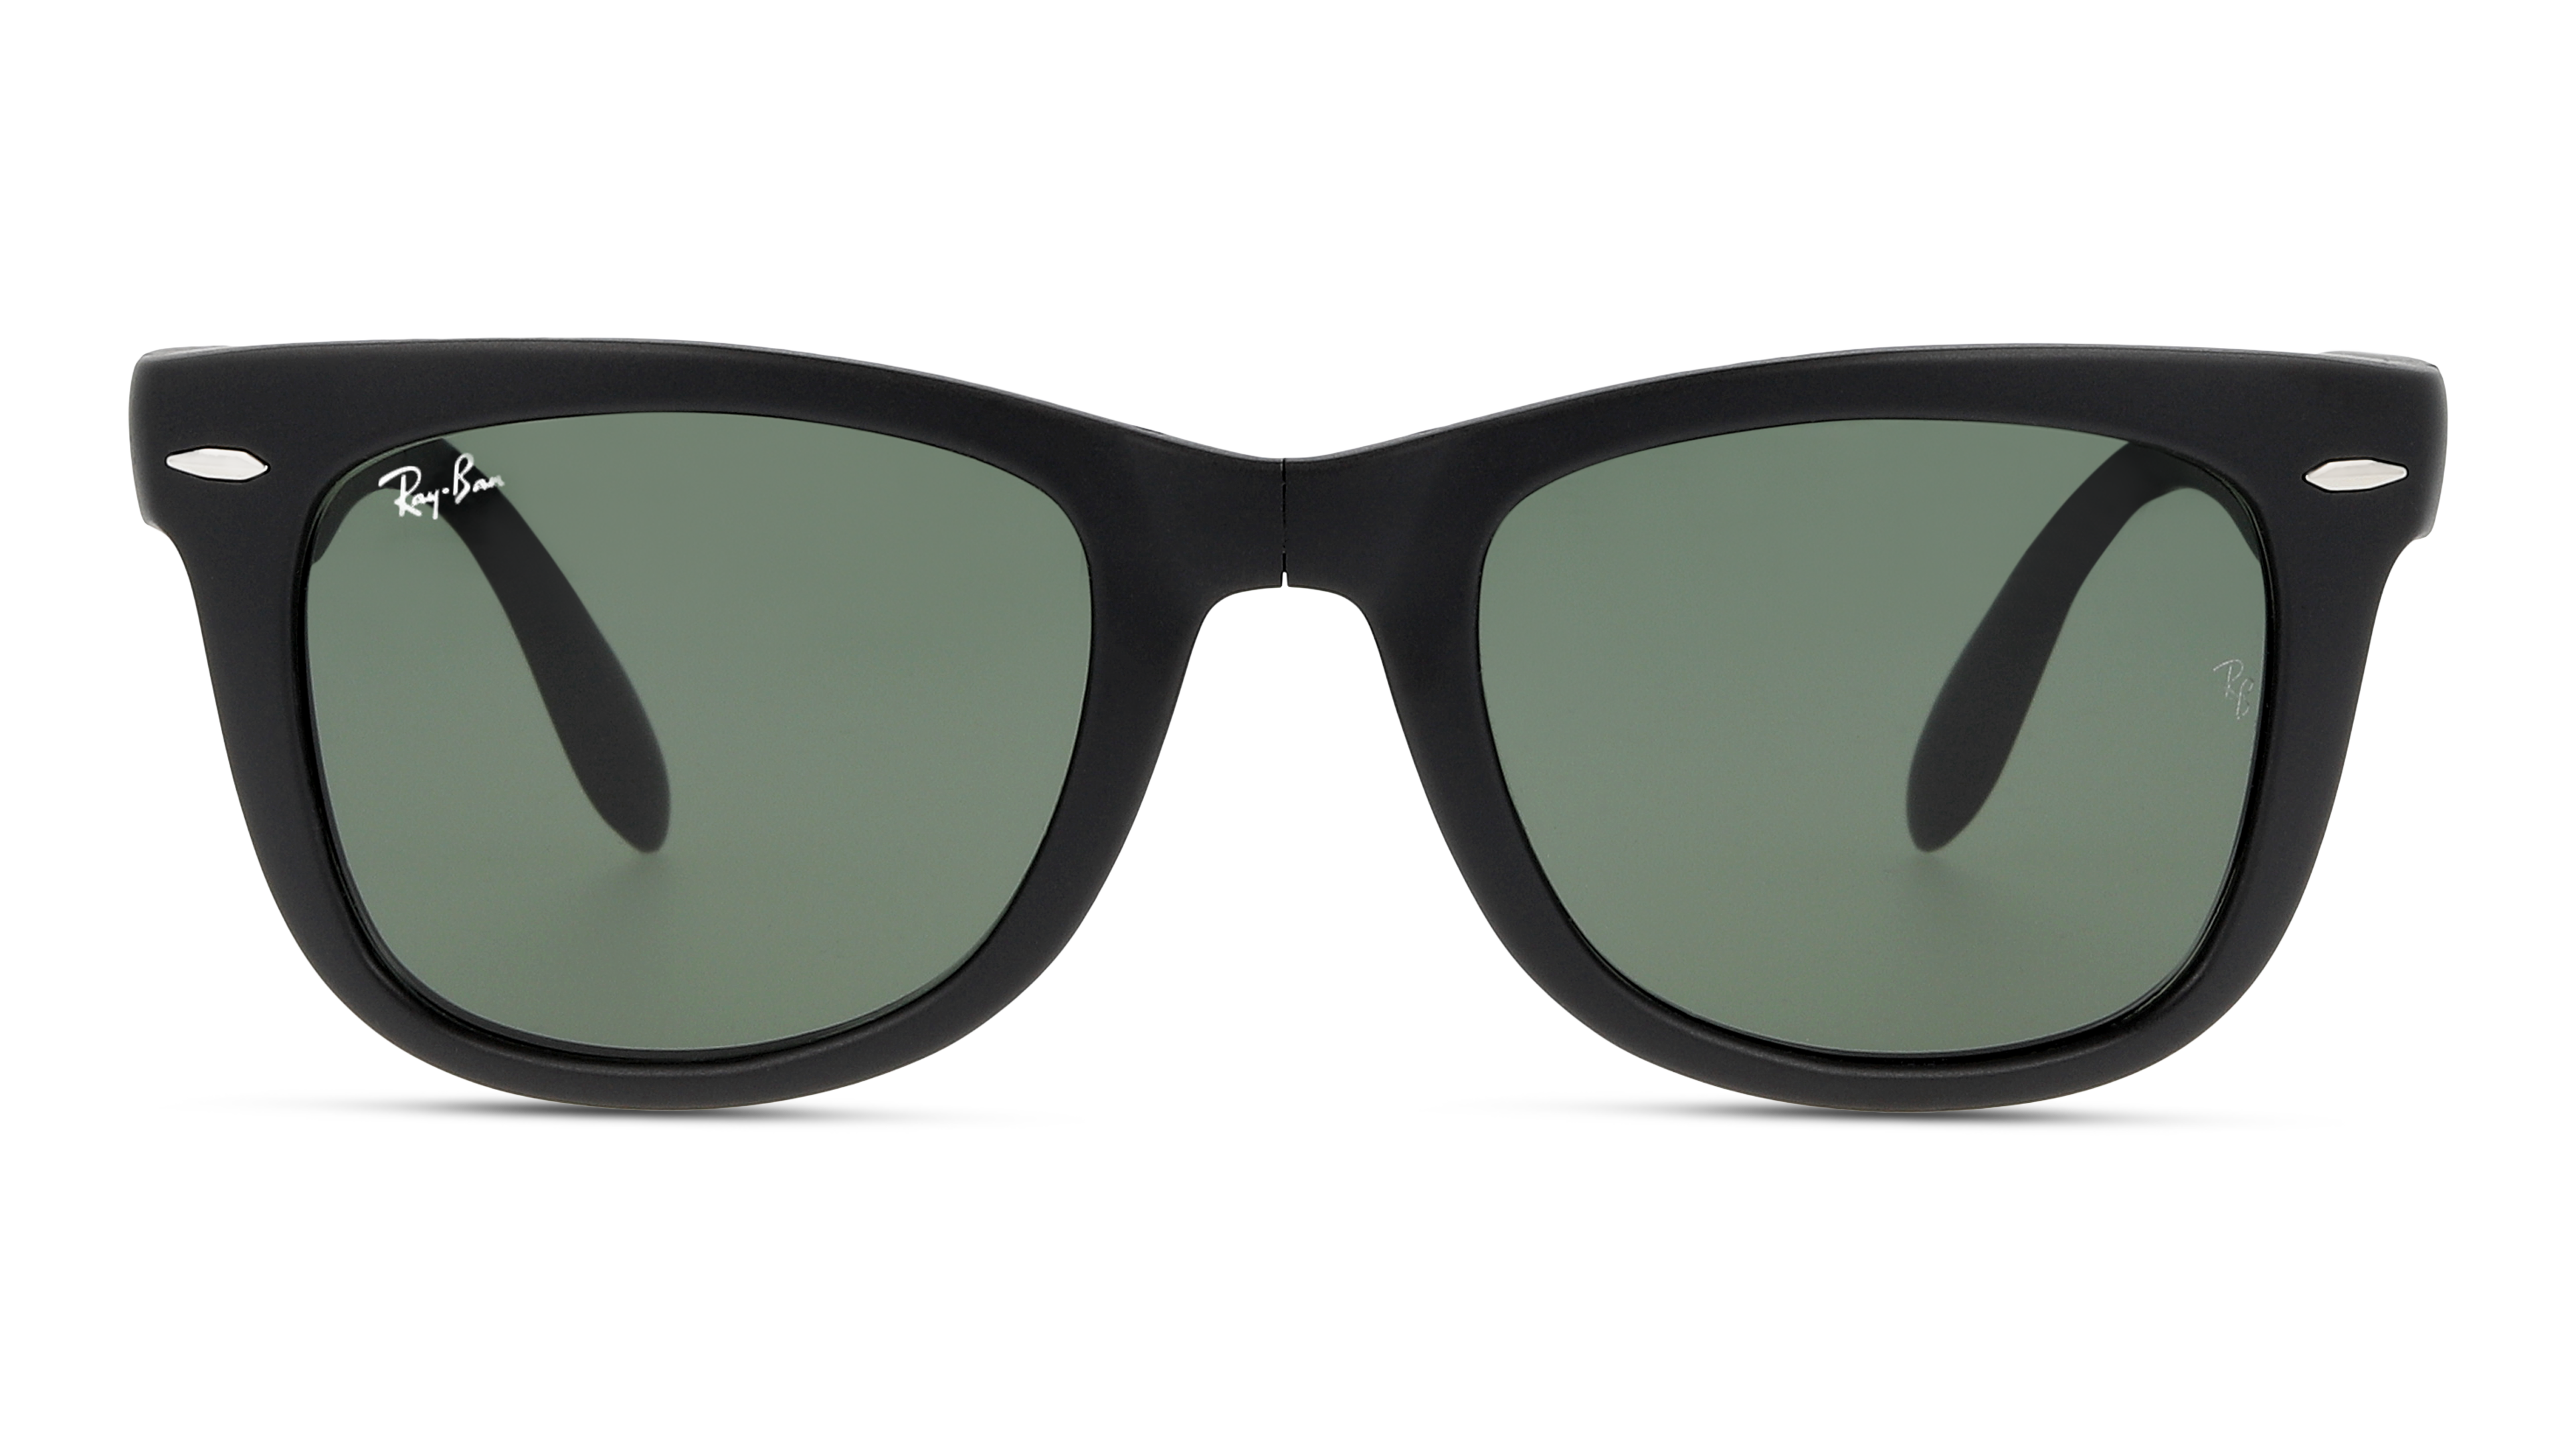 [products.image.front] Ray-Ban Wayfarer Folding Classic RB4105 601S